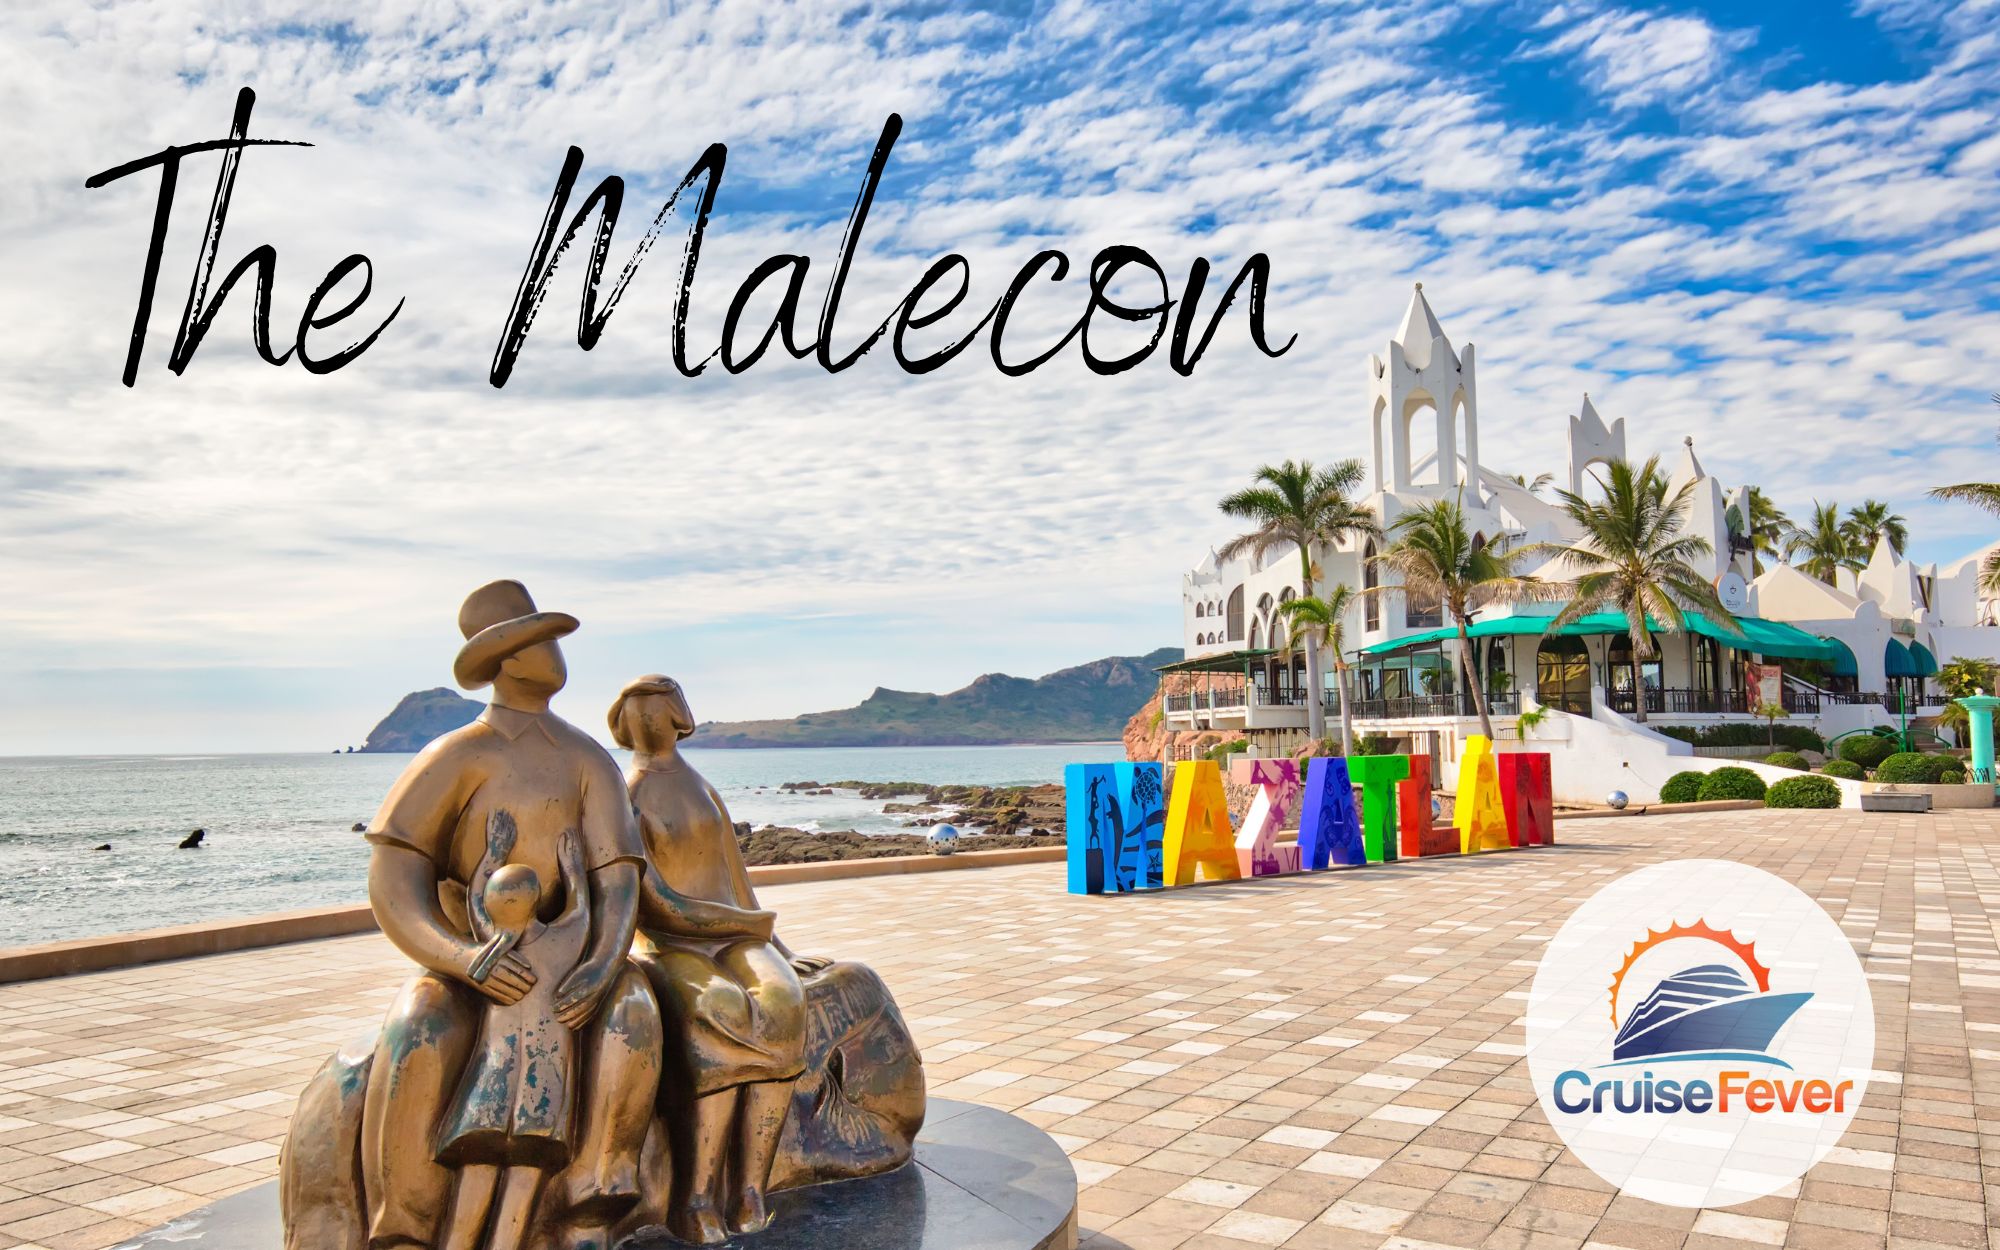 the sculptures and buildings around the malecon